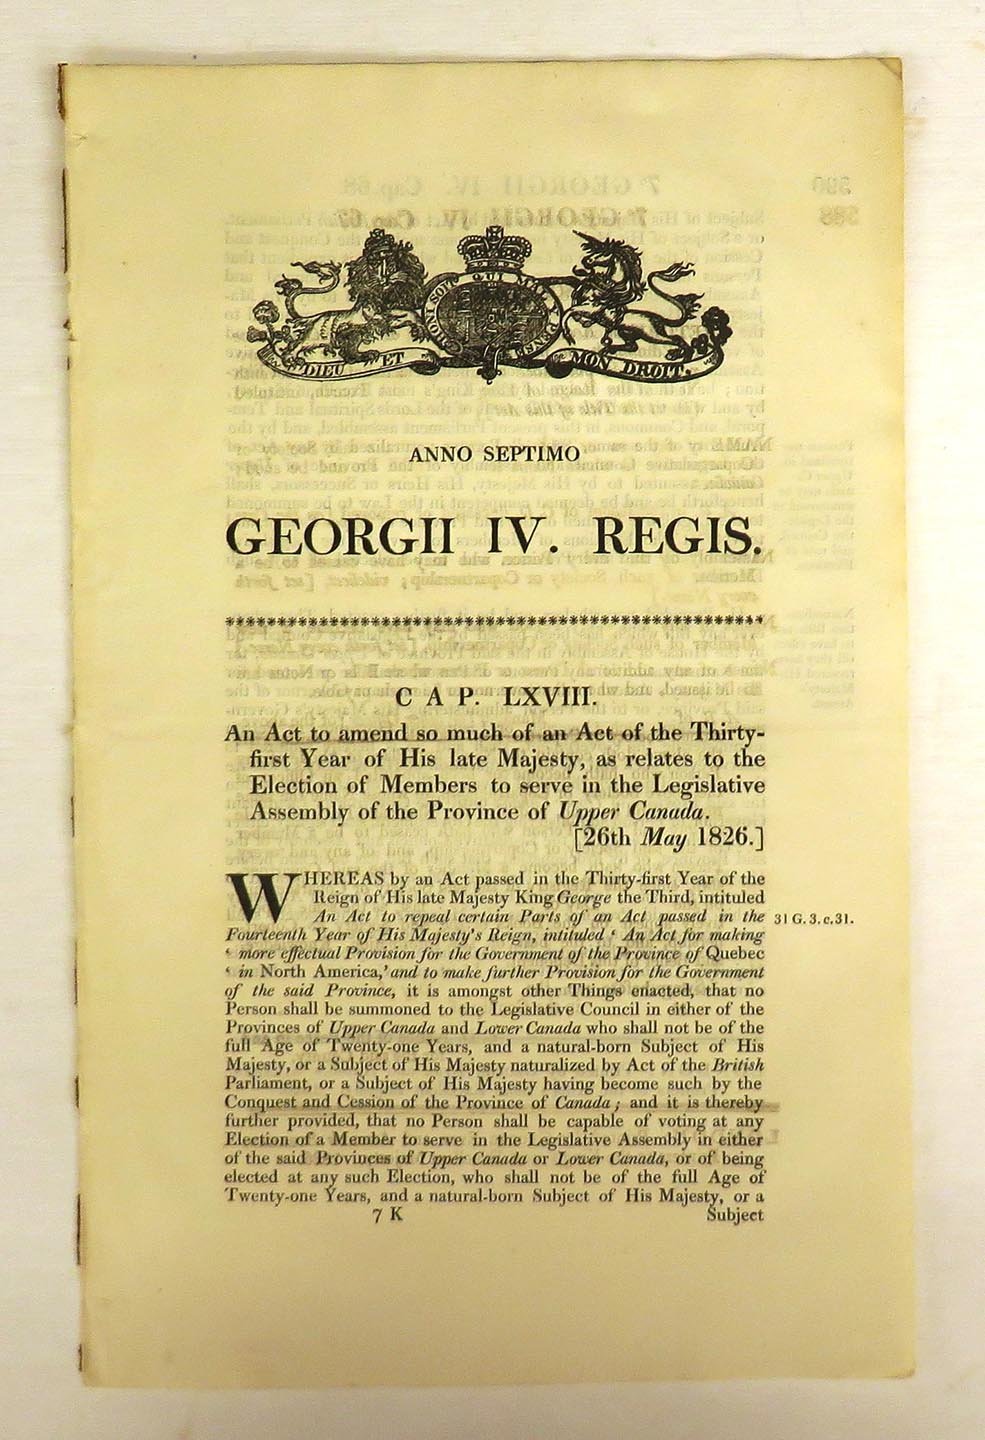 An Act to amend so much of an Act of the thirty-first Year of His late Majesty, as relates to the Election of Members to serve in the Legislative Assembly of the Province of Upper Canada